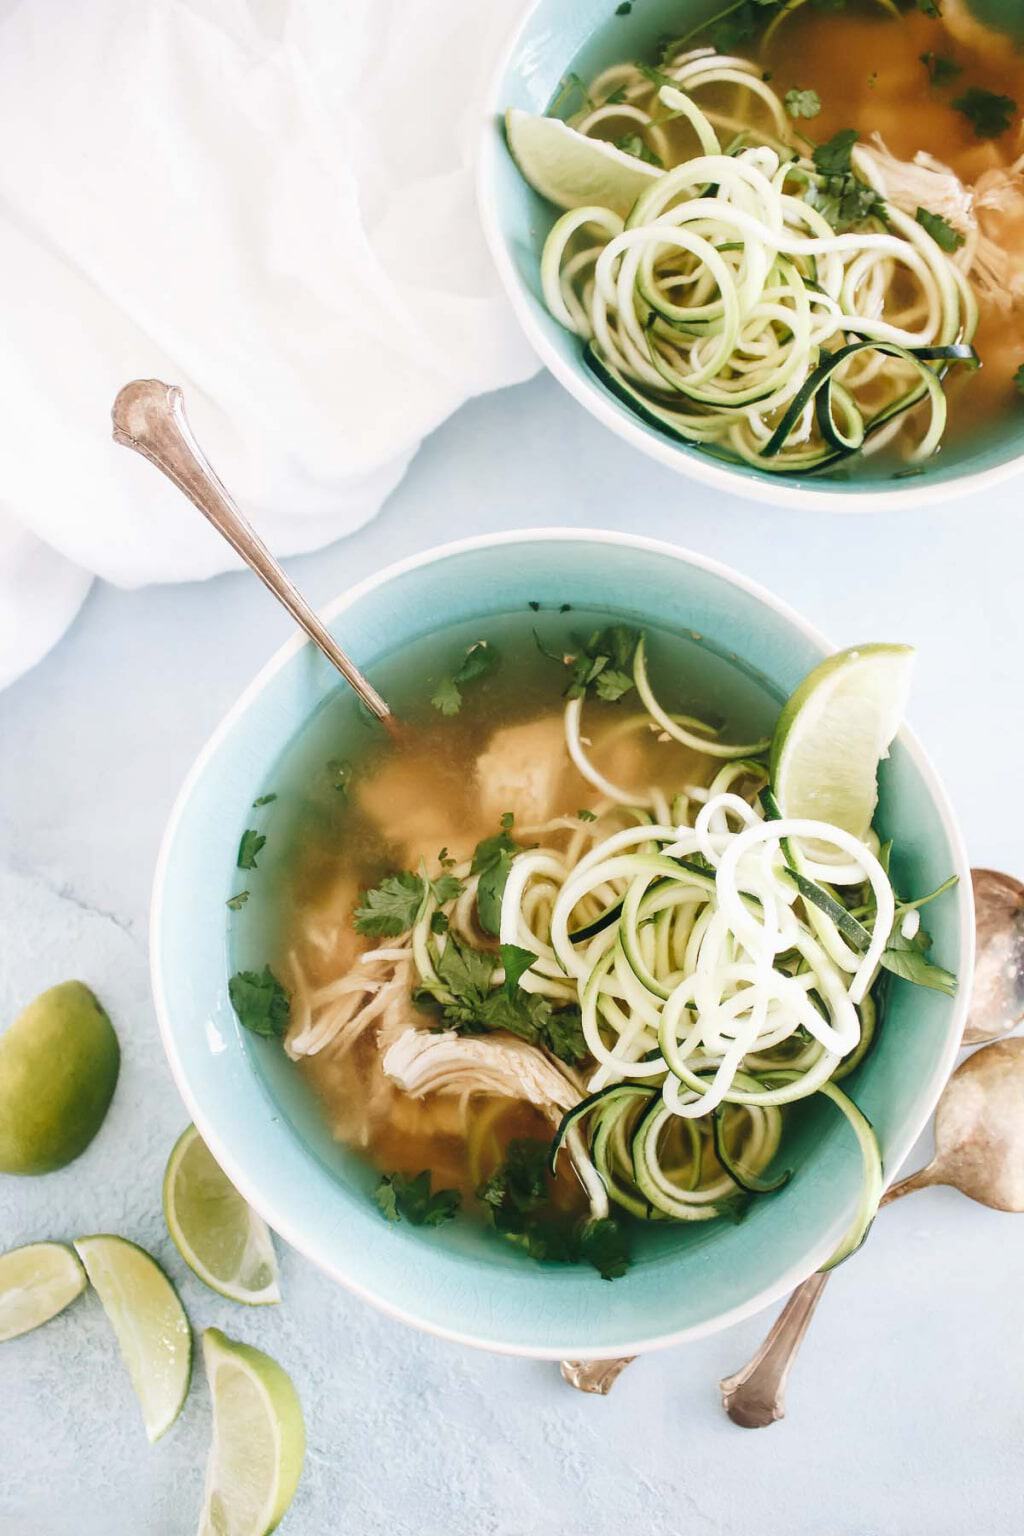 Healthy Paleo Slow Cooker Dinners - Paleo Chicken Pho with Zoodles